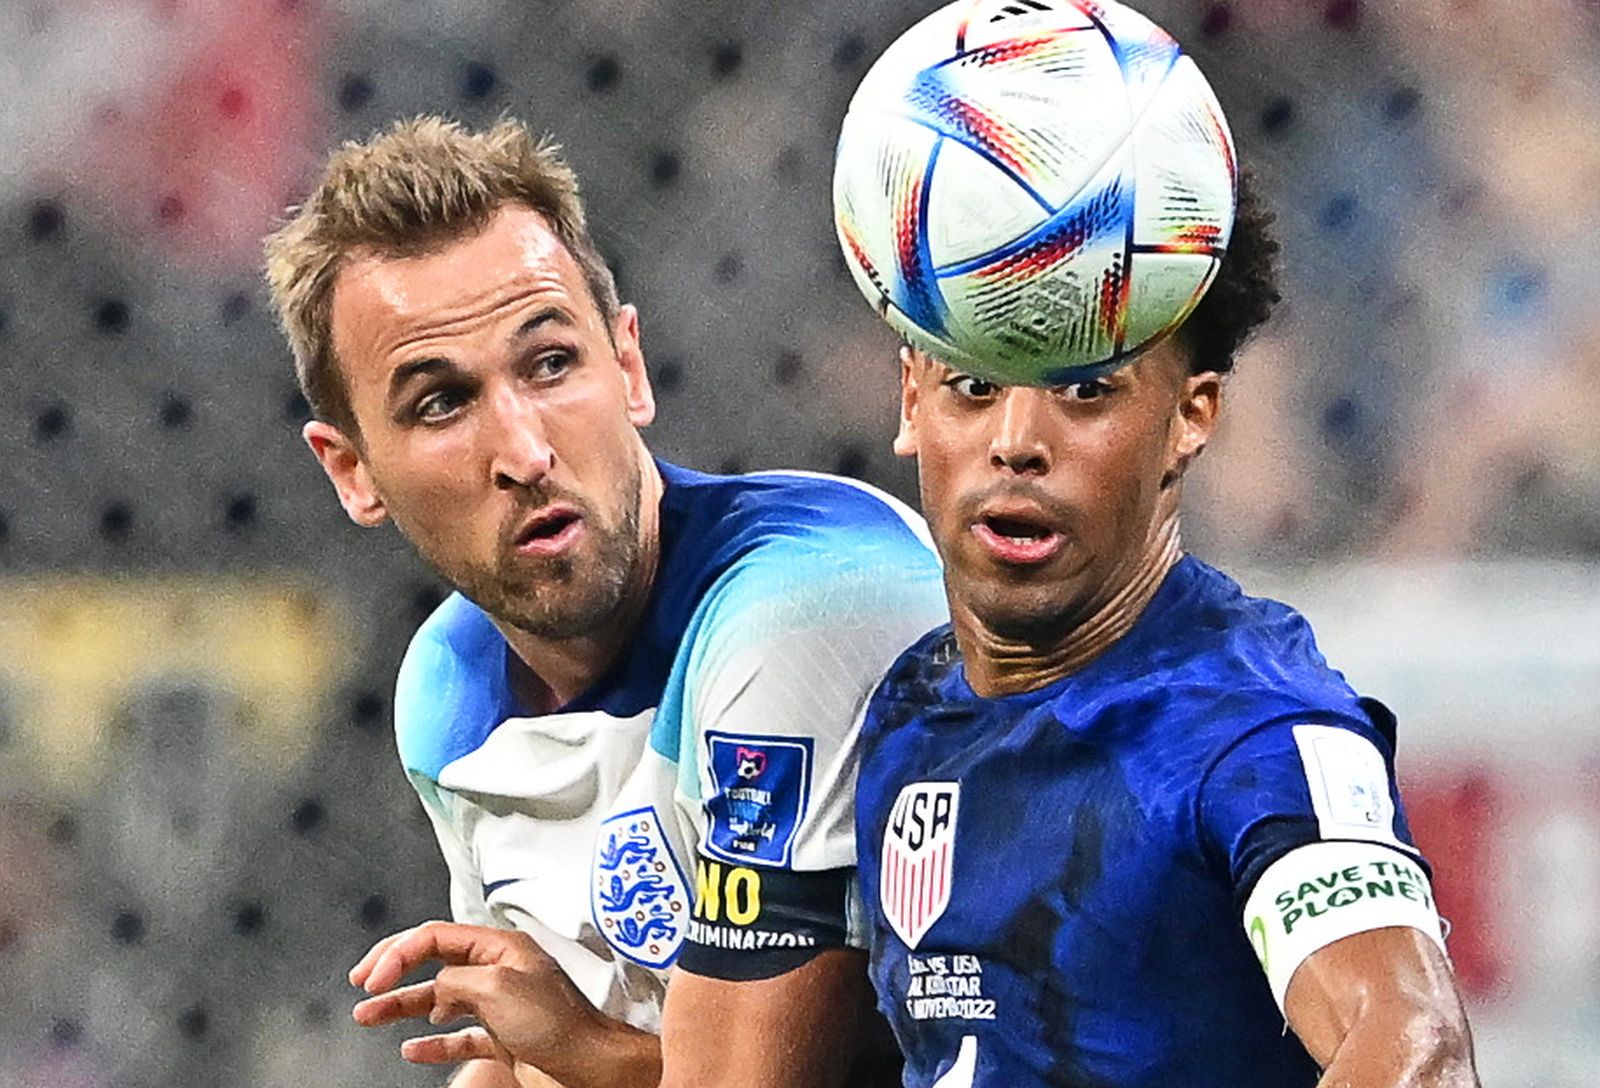 epa10328806 Harry Kane (L) of England in action against Tyler Adams (R) of the USA during the FIFA World Cup 2022 group B soccer match between England and the USA at Al Bayt Stadium in Al Khor, Qatar, 25 November 2022.  EPA/Noushad Thekkayil